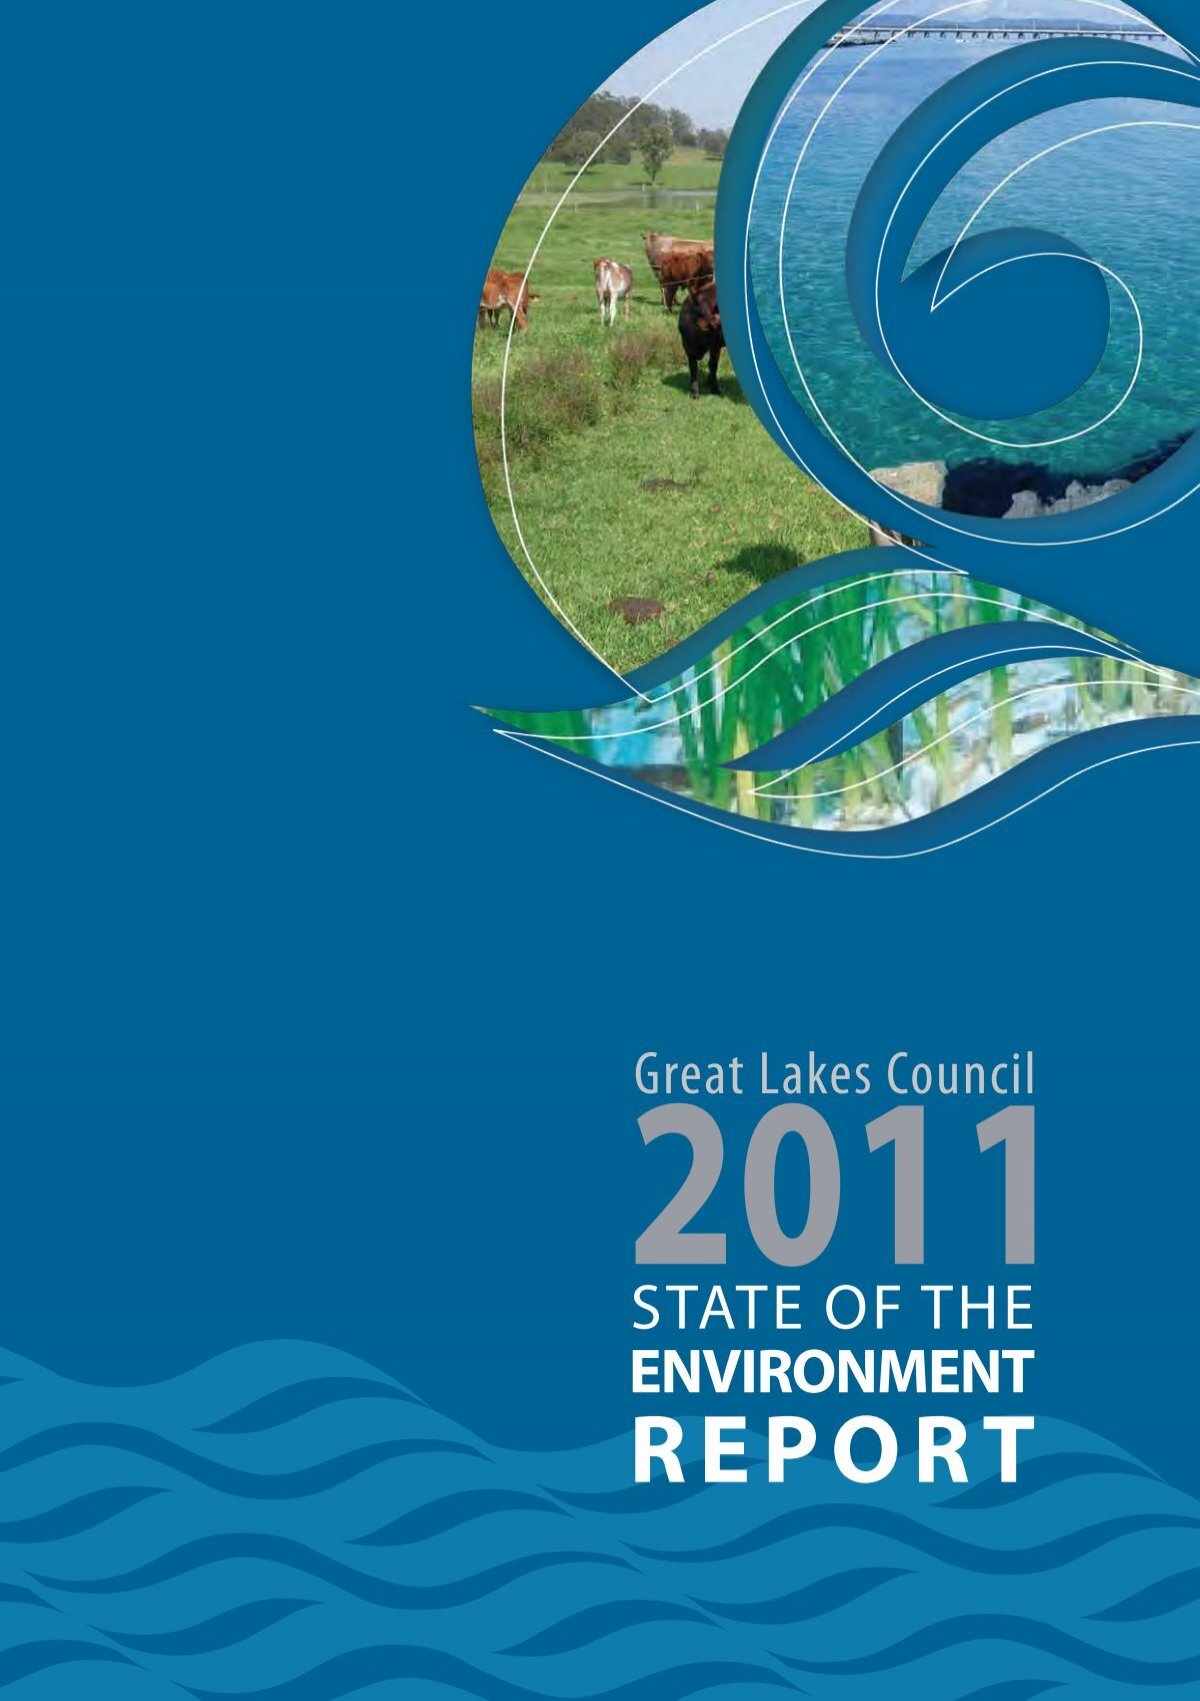 EnvironmEnt rEport - Great Lakes Council - NSW Government